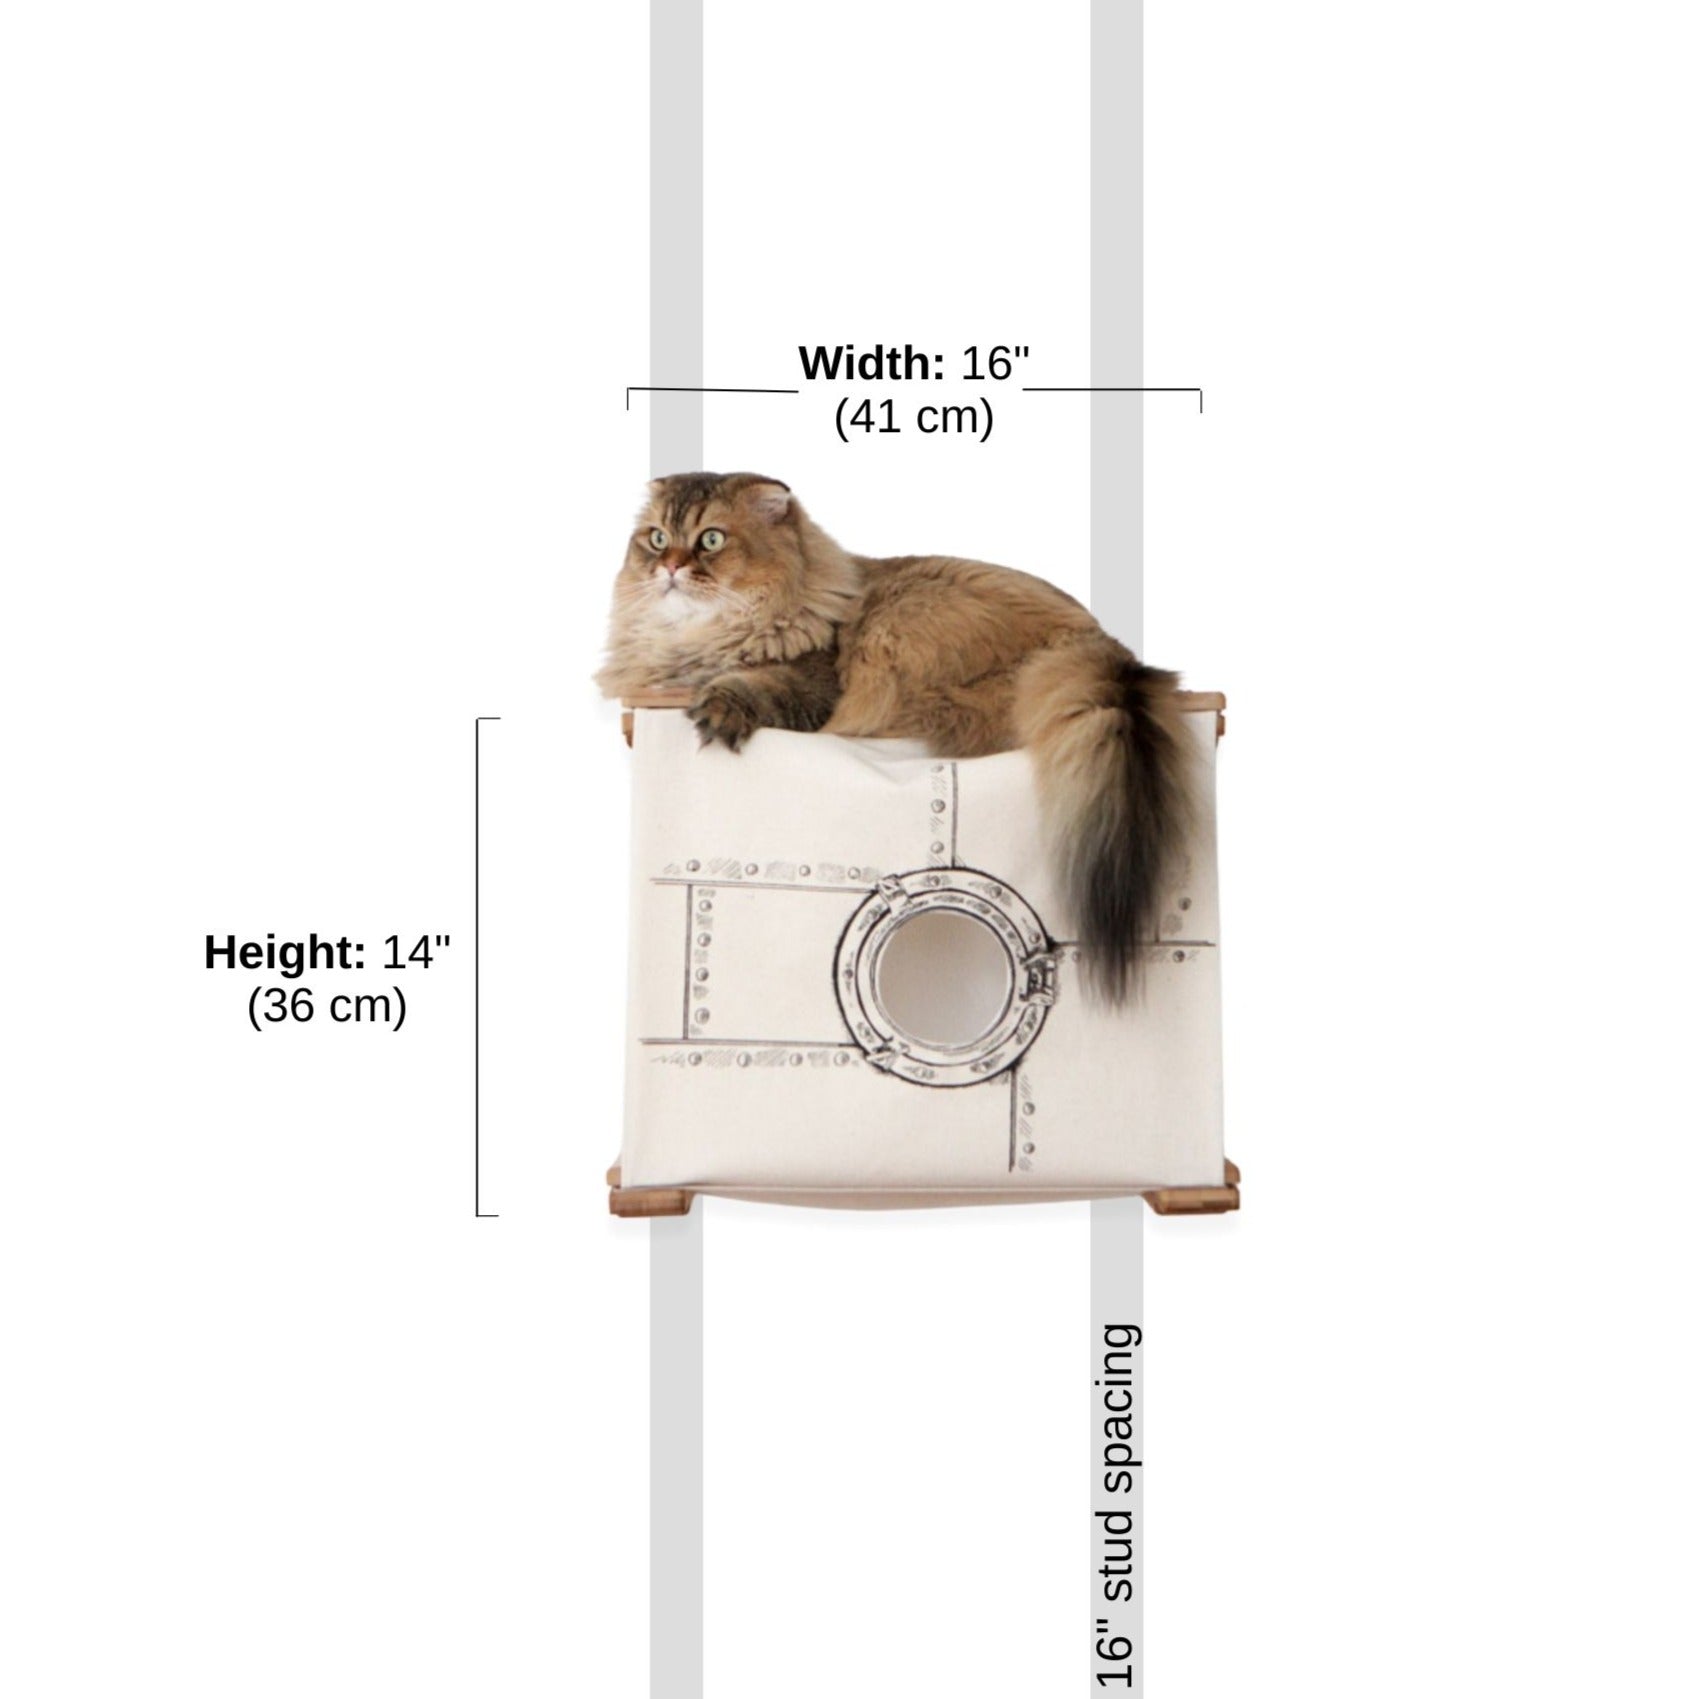 Cat Wall Cubby - Enclosed Cat Bed by Catastrophic Creations